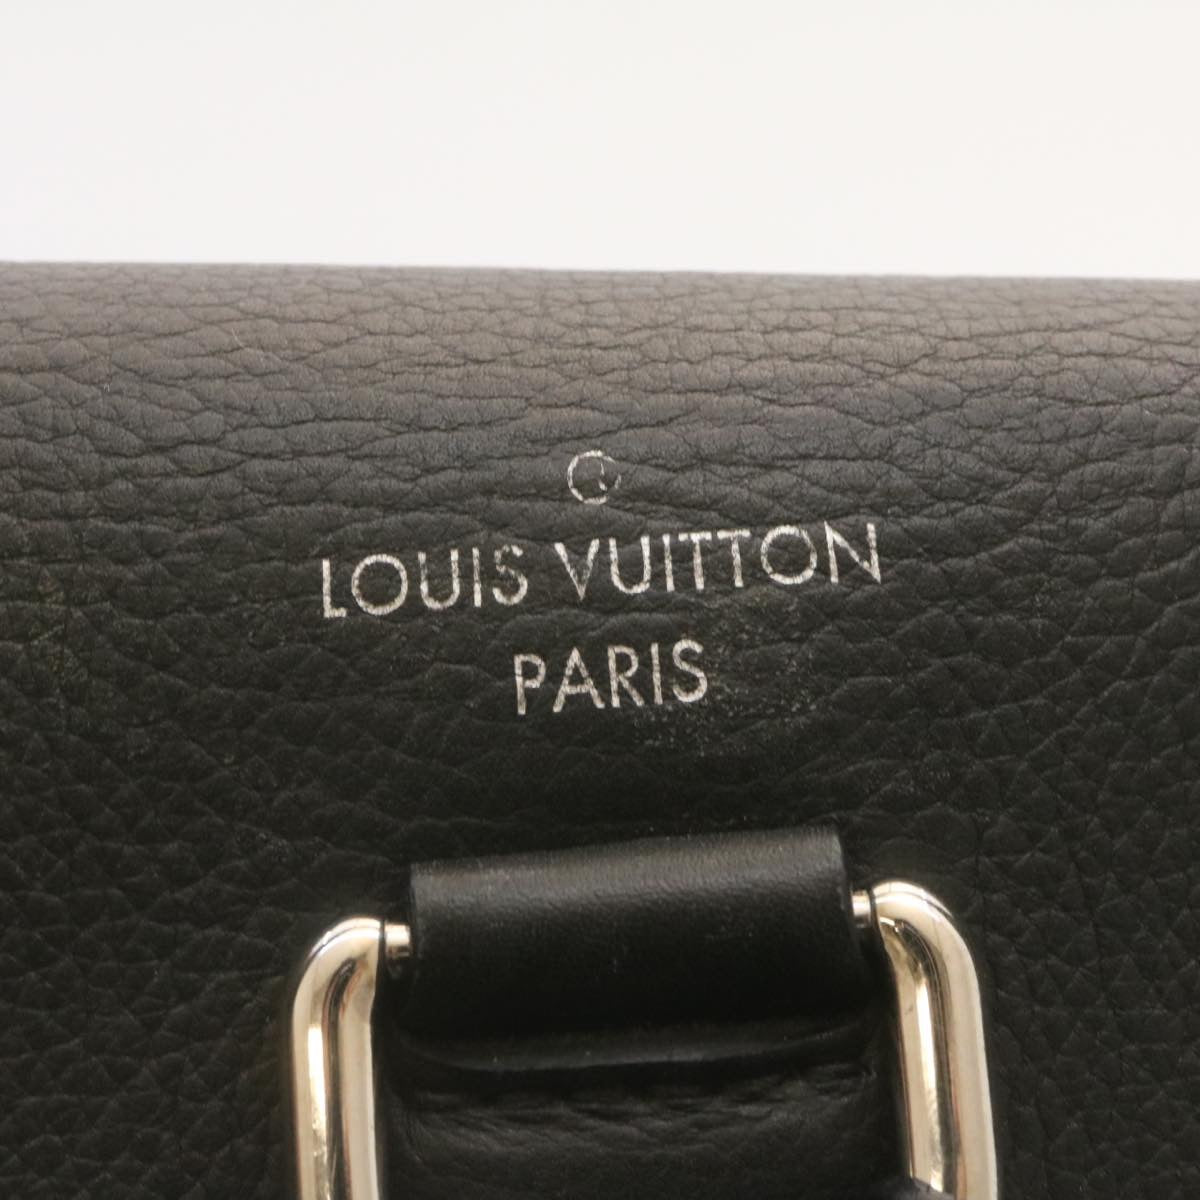 LOUIS VUITTON Calfskin Leather Turn Lock Rock Me Backpack Black M41815 Auth bs536A